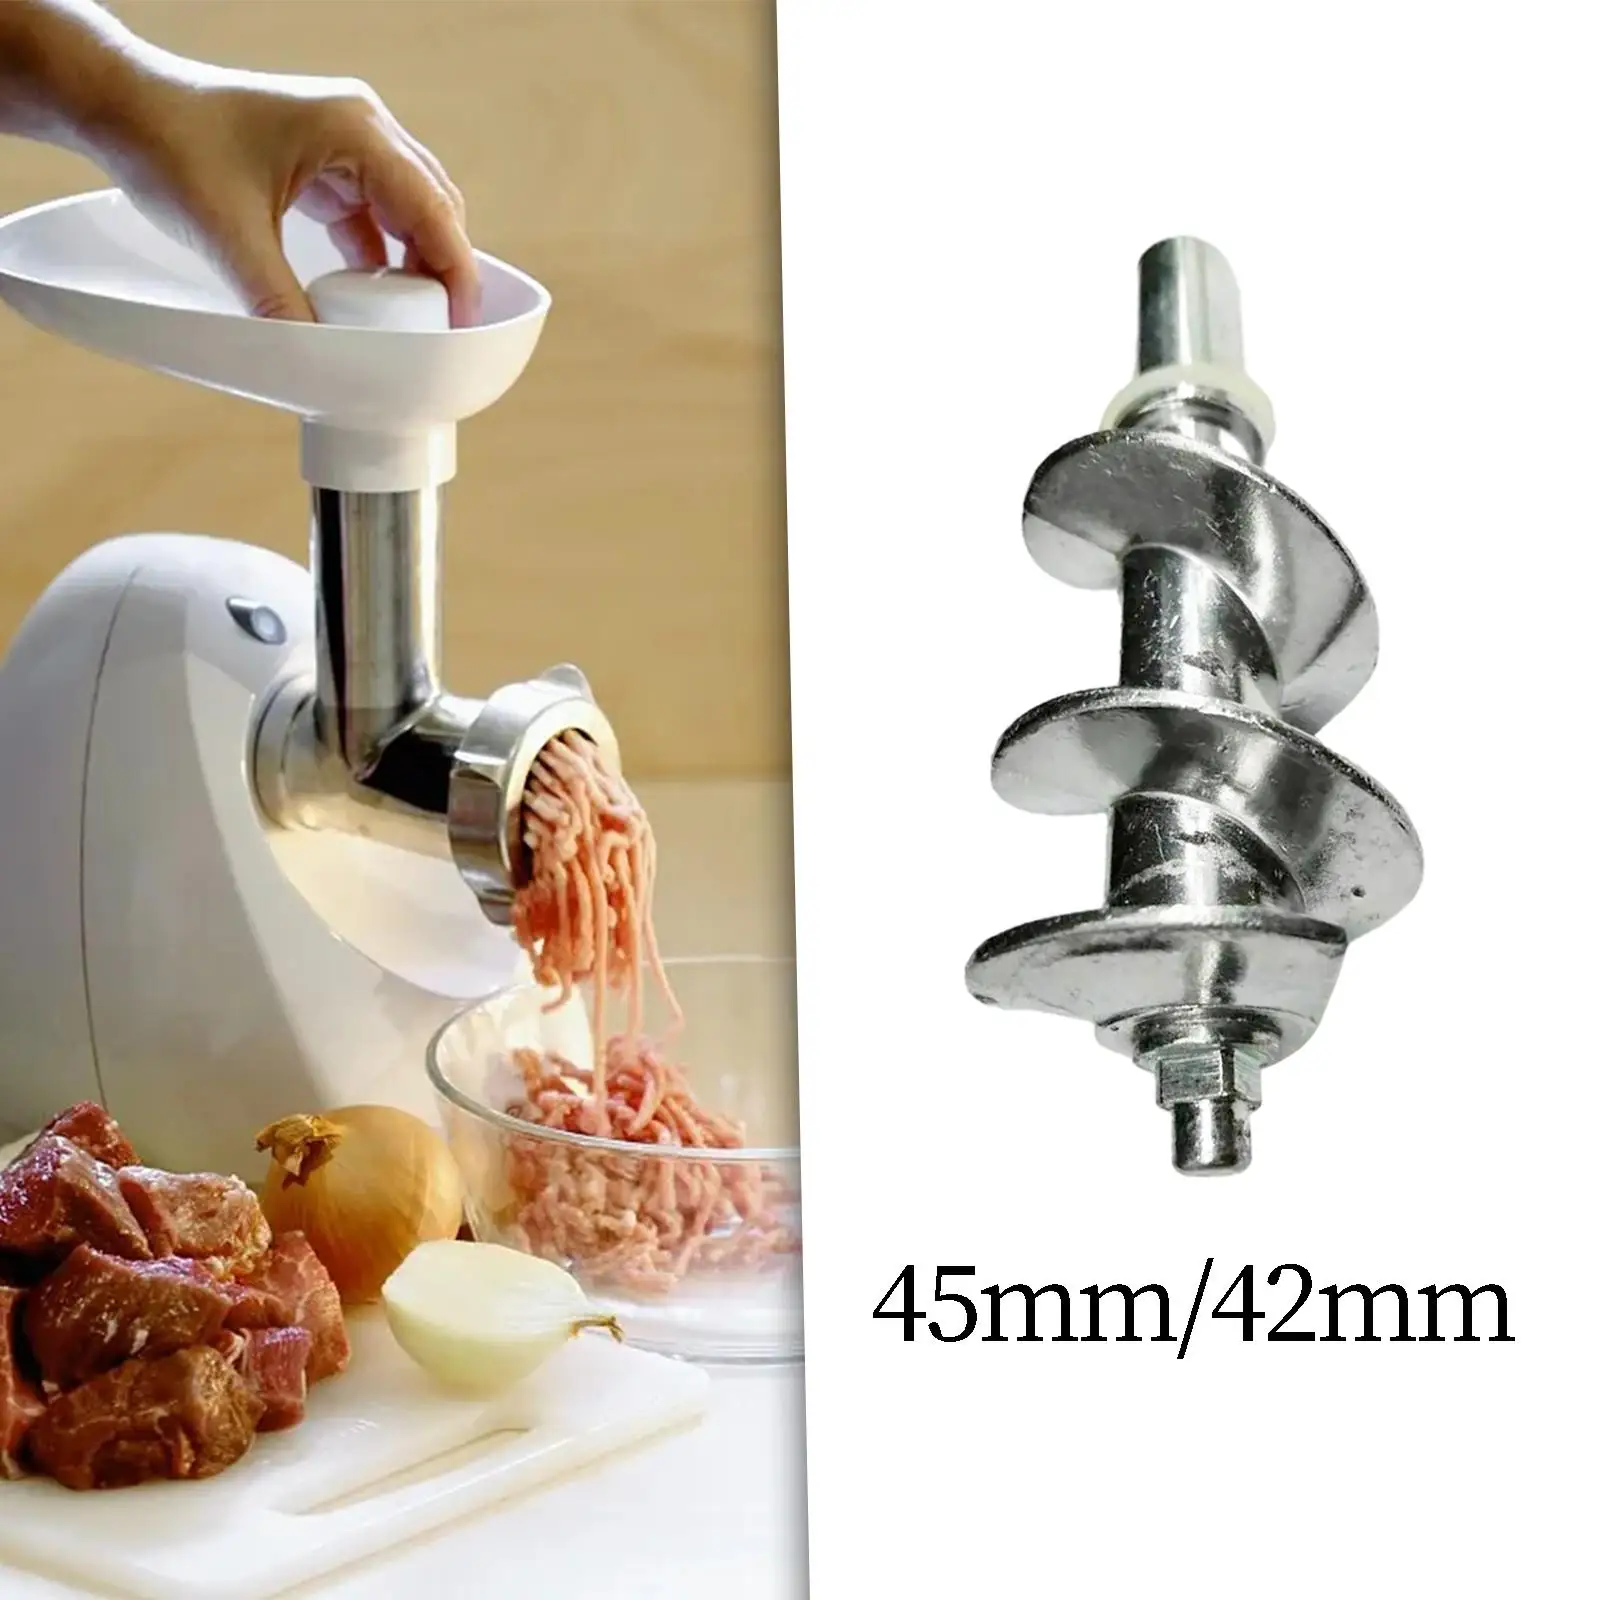 Meat Grinder Screw Auger Home Kitchen Accessories Replacement Meat Grinder Screw for Pmg 2008 M01M150 G20prpwdr PN005 mm0407jsw